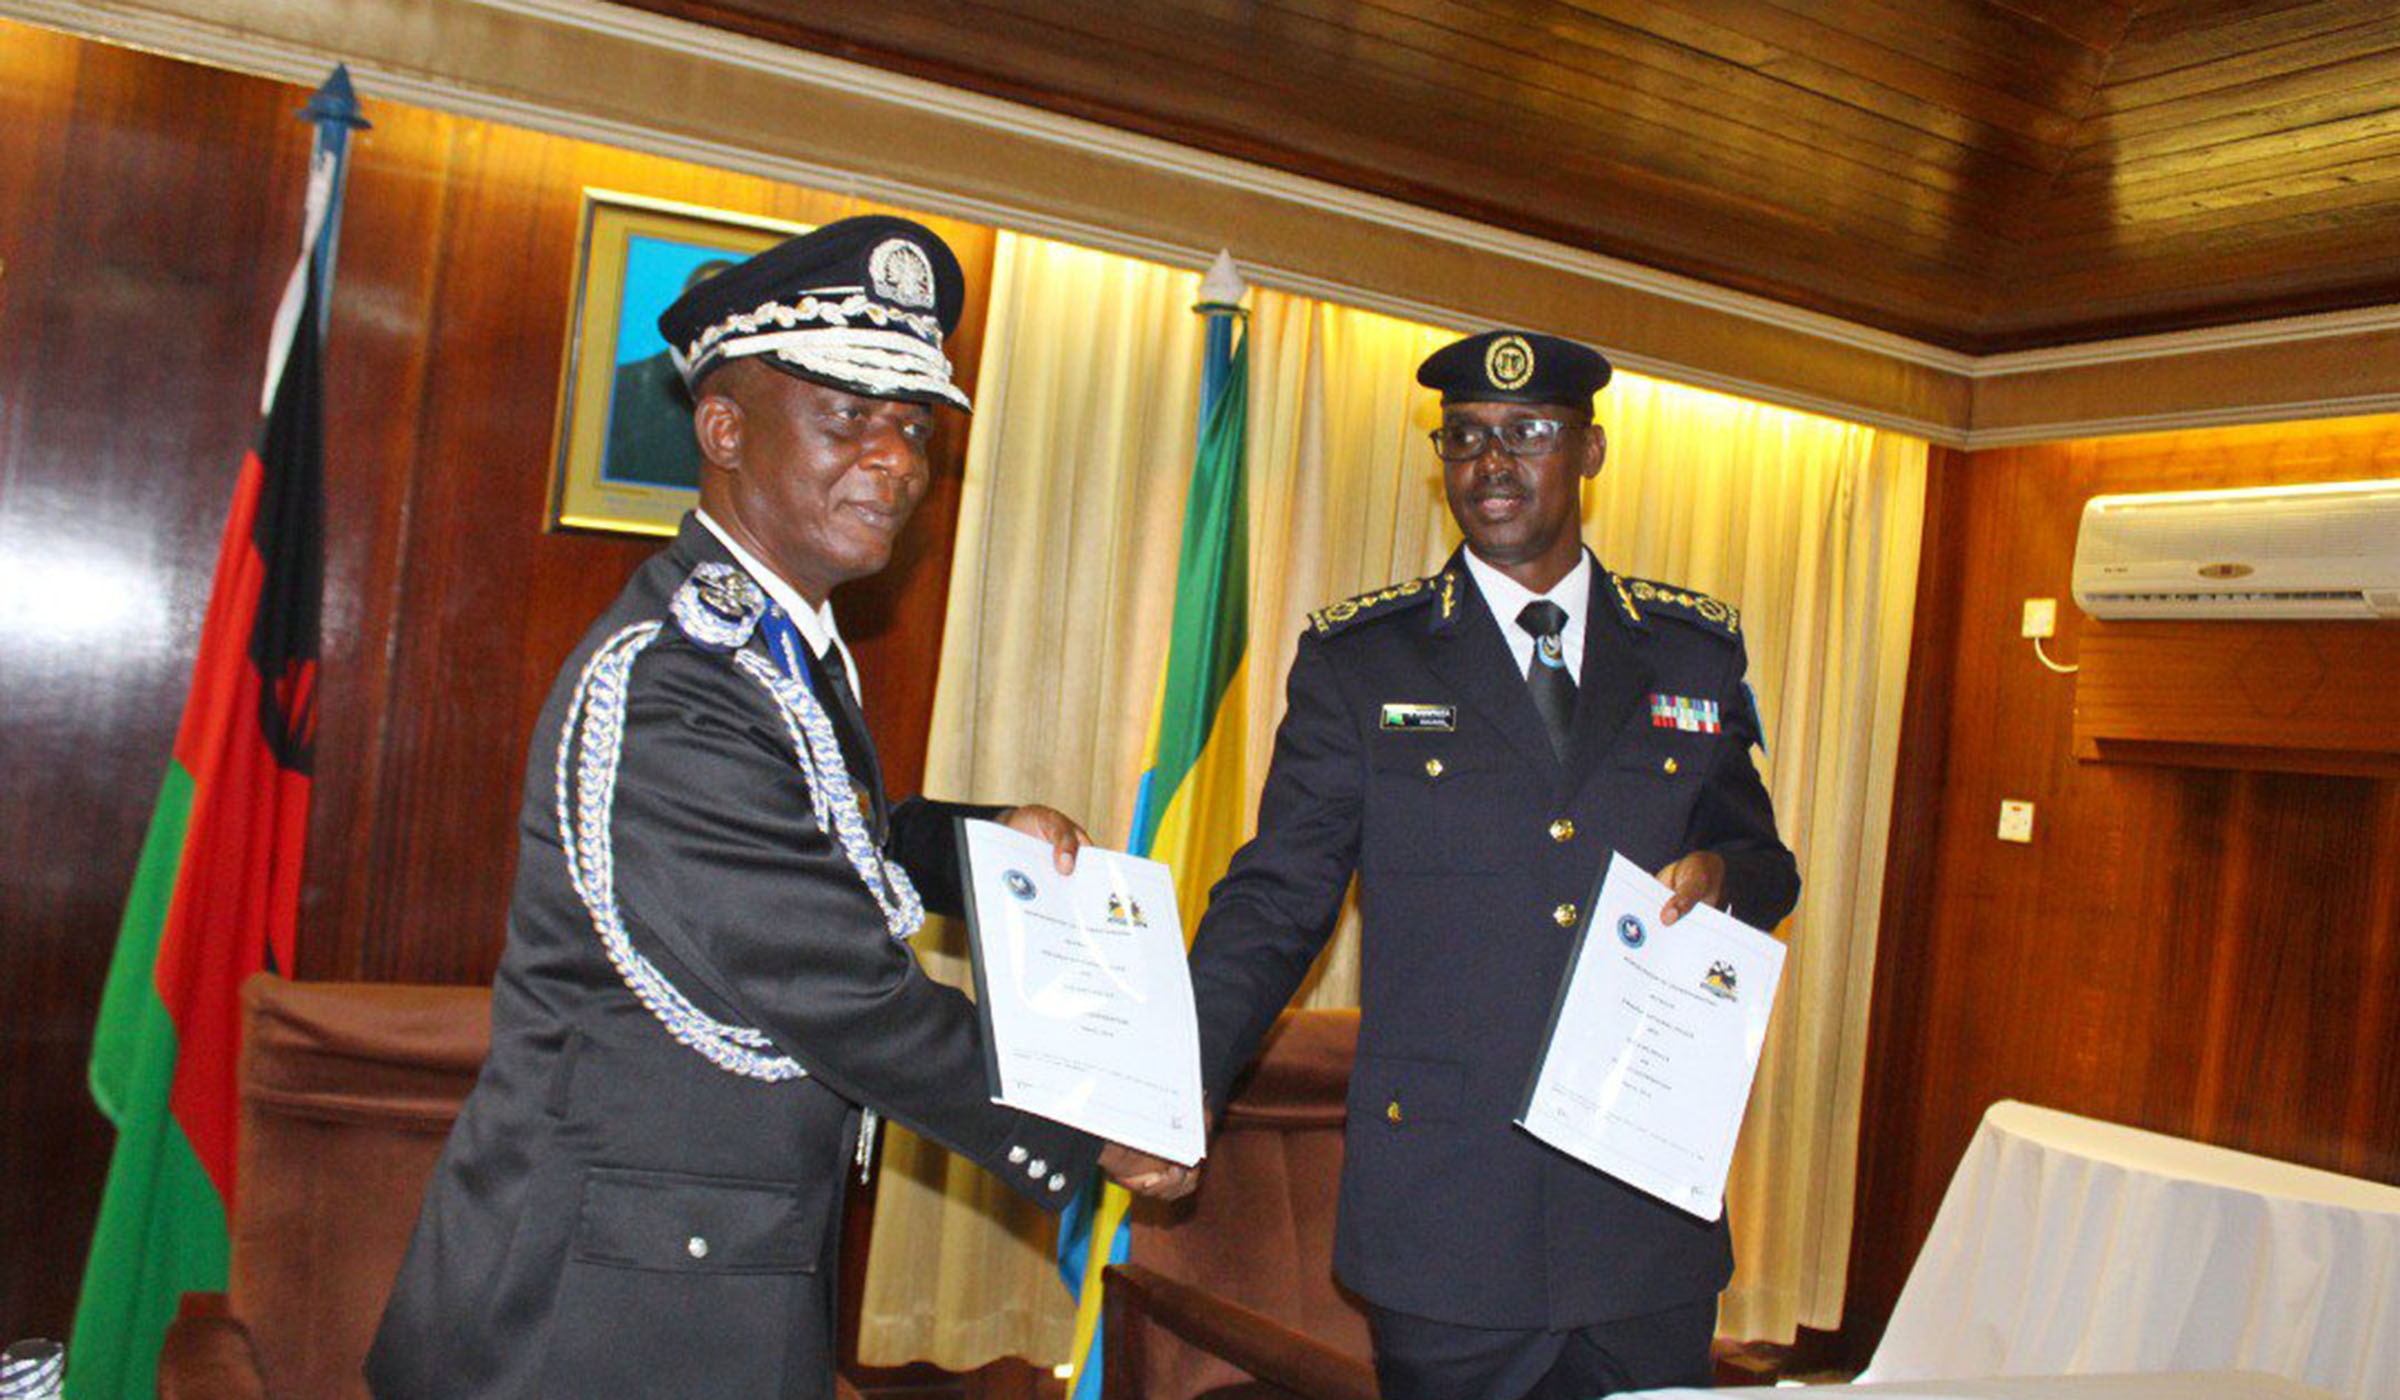 IGP Dan Munyuza with his Malawian counterpart Rodney Jose (left) exchange documents after the signing ceremony on March 26, 2019 in Lilongwe. Courtesy.